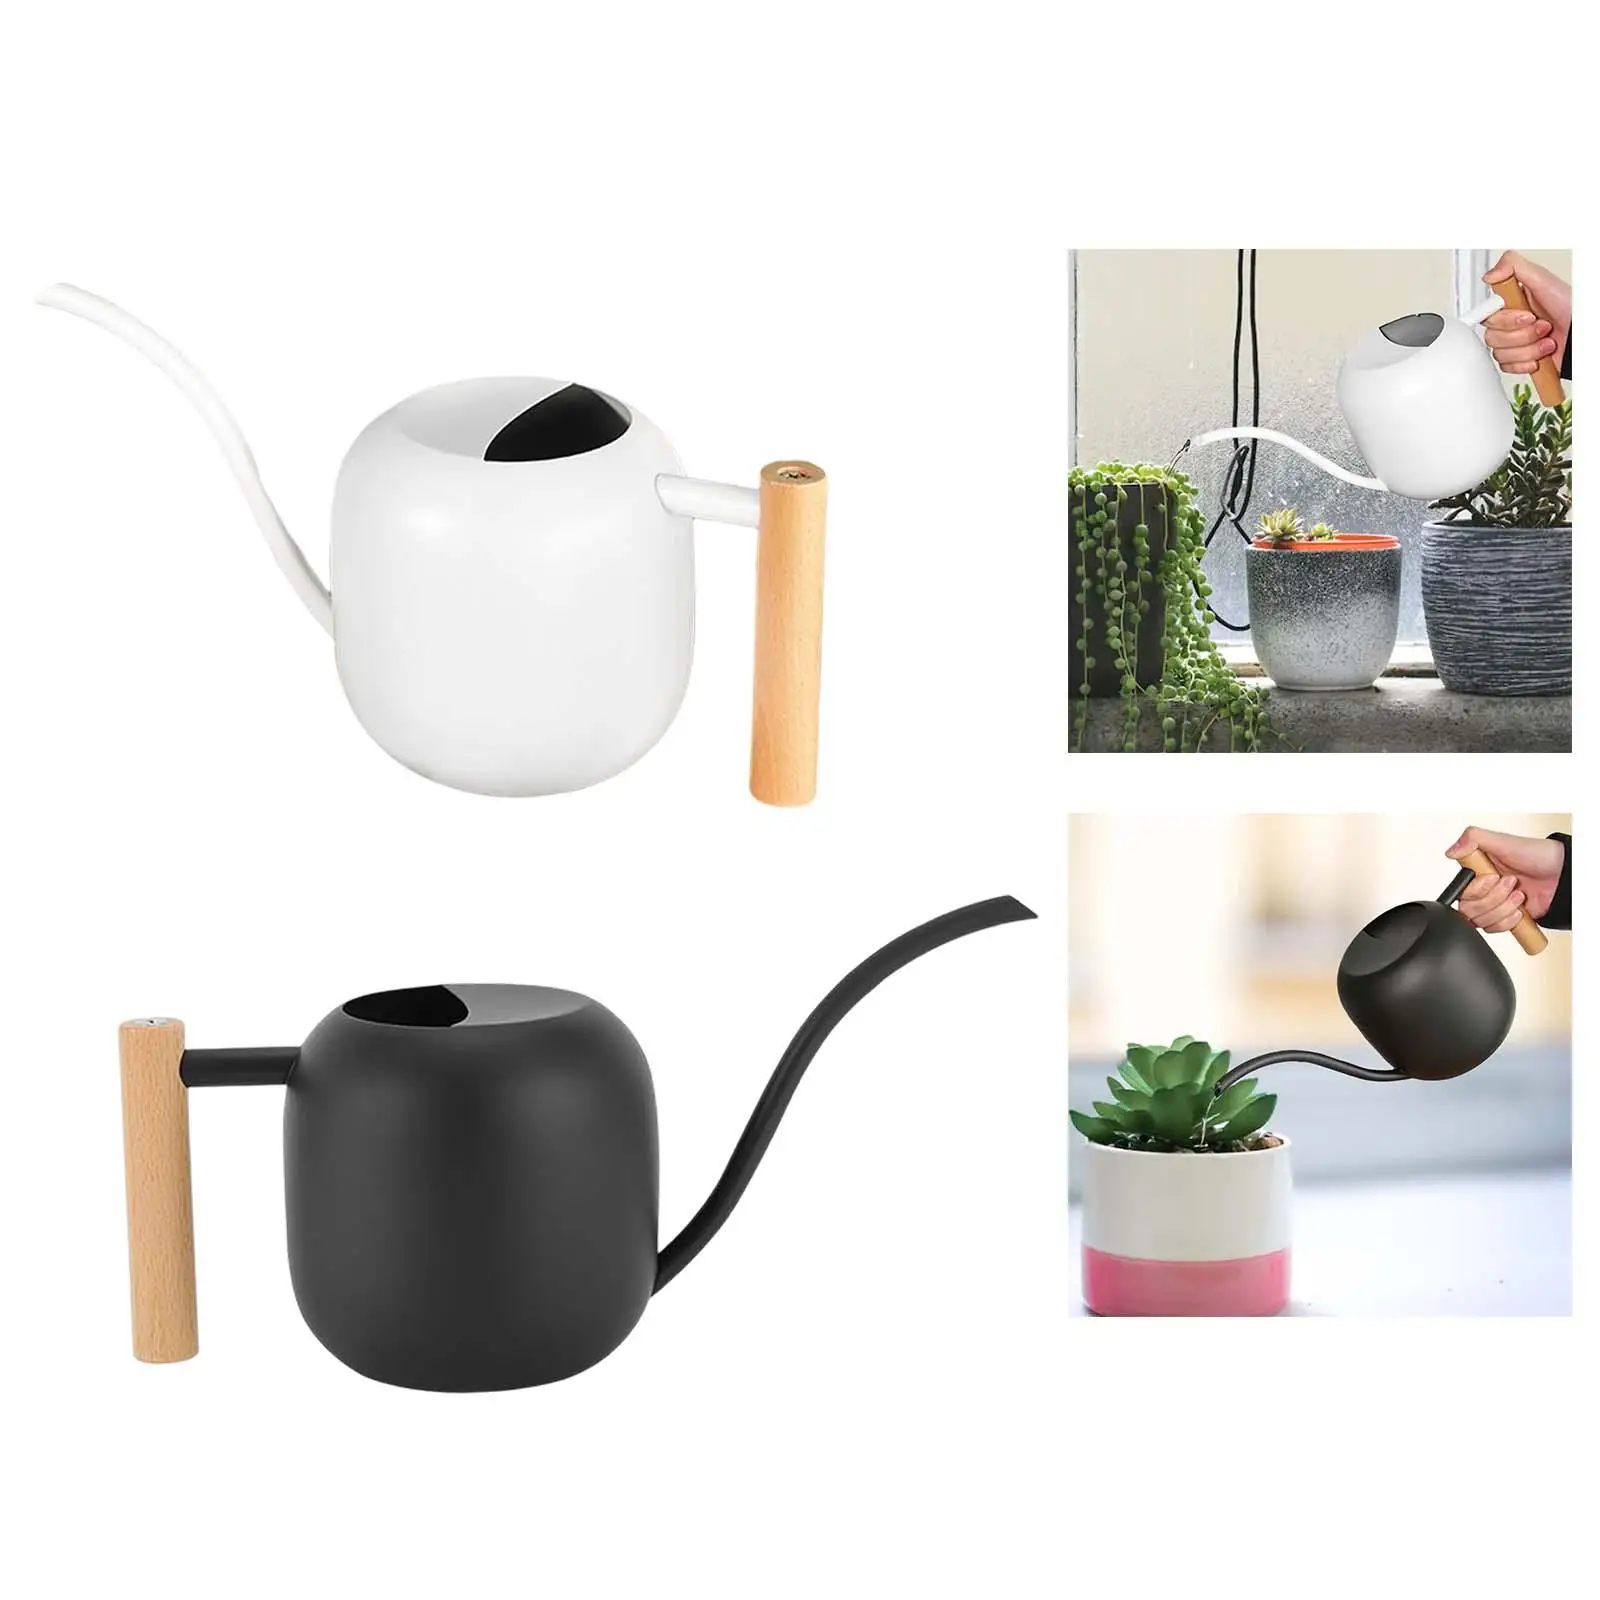 Stainless Steel Watering Can with Long Mouth,1.2L Watering Pot,Watering Flower Kettle for Bonsai Garden Shower Indoor Decor